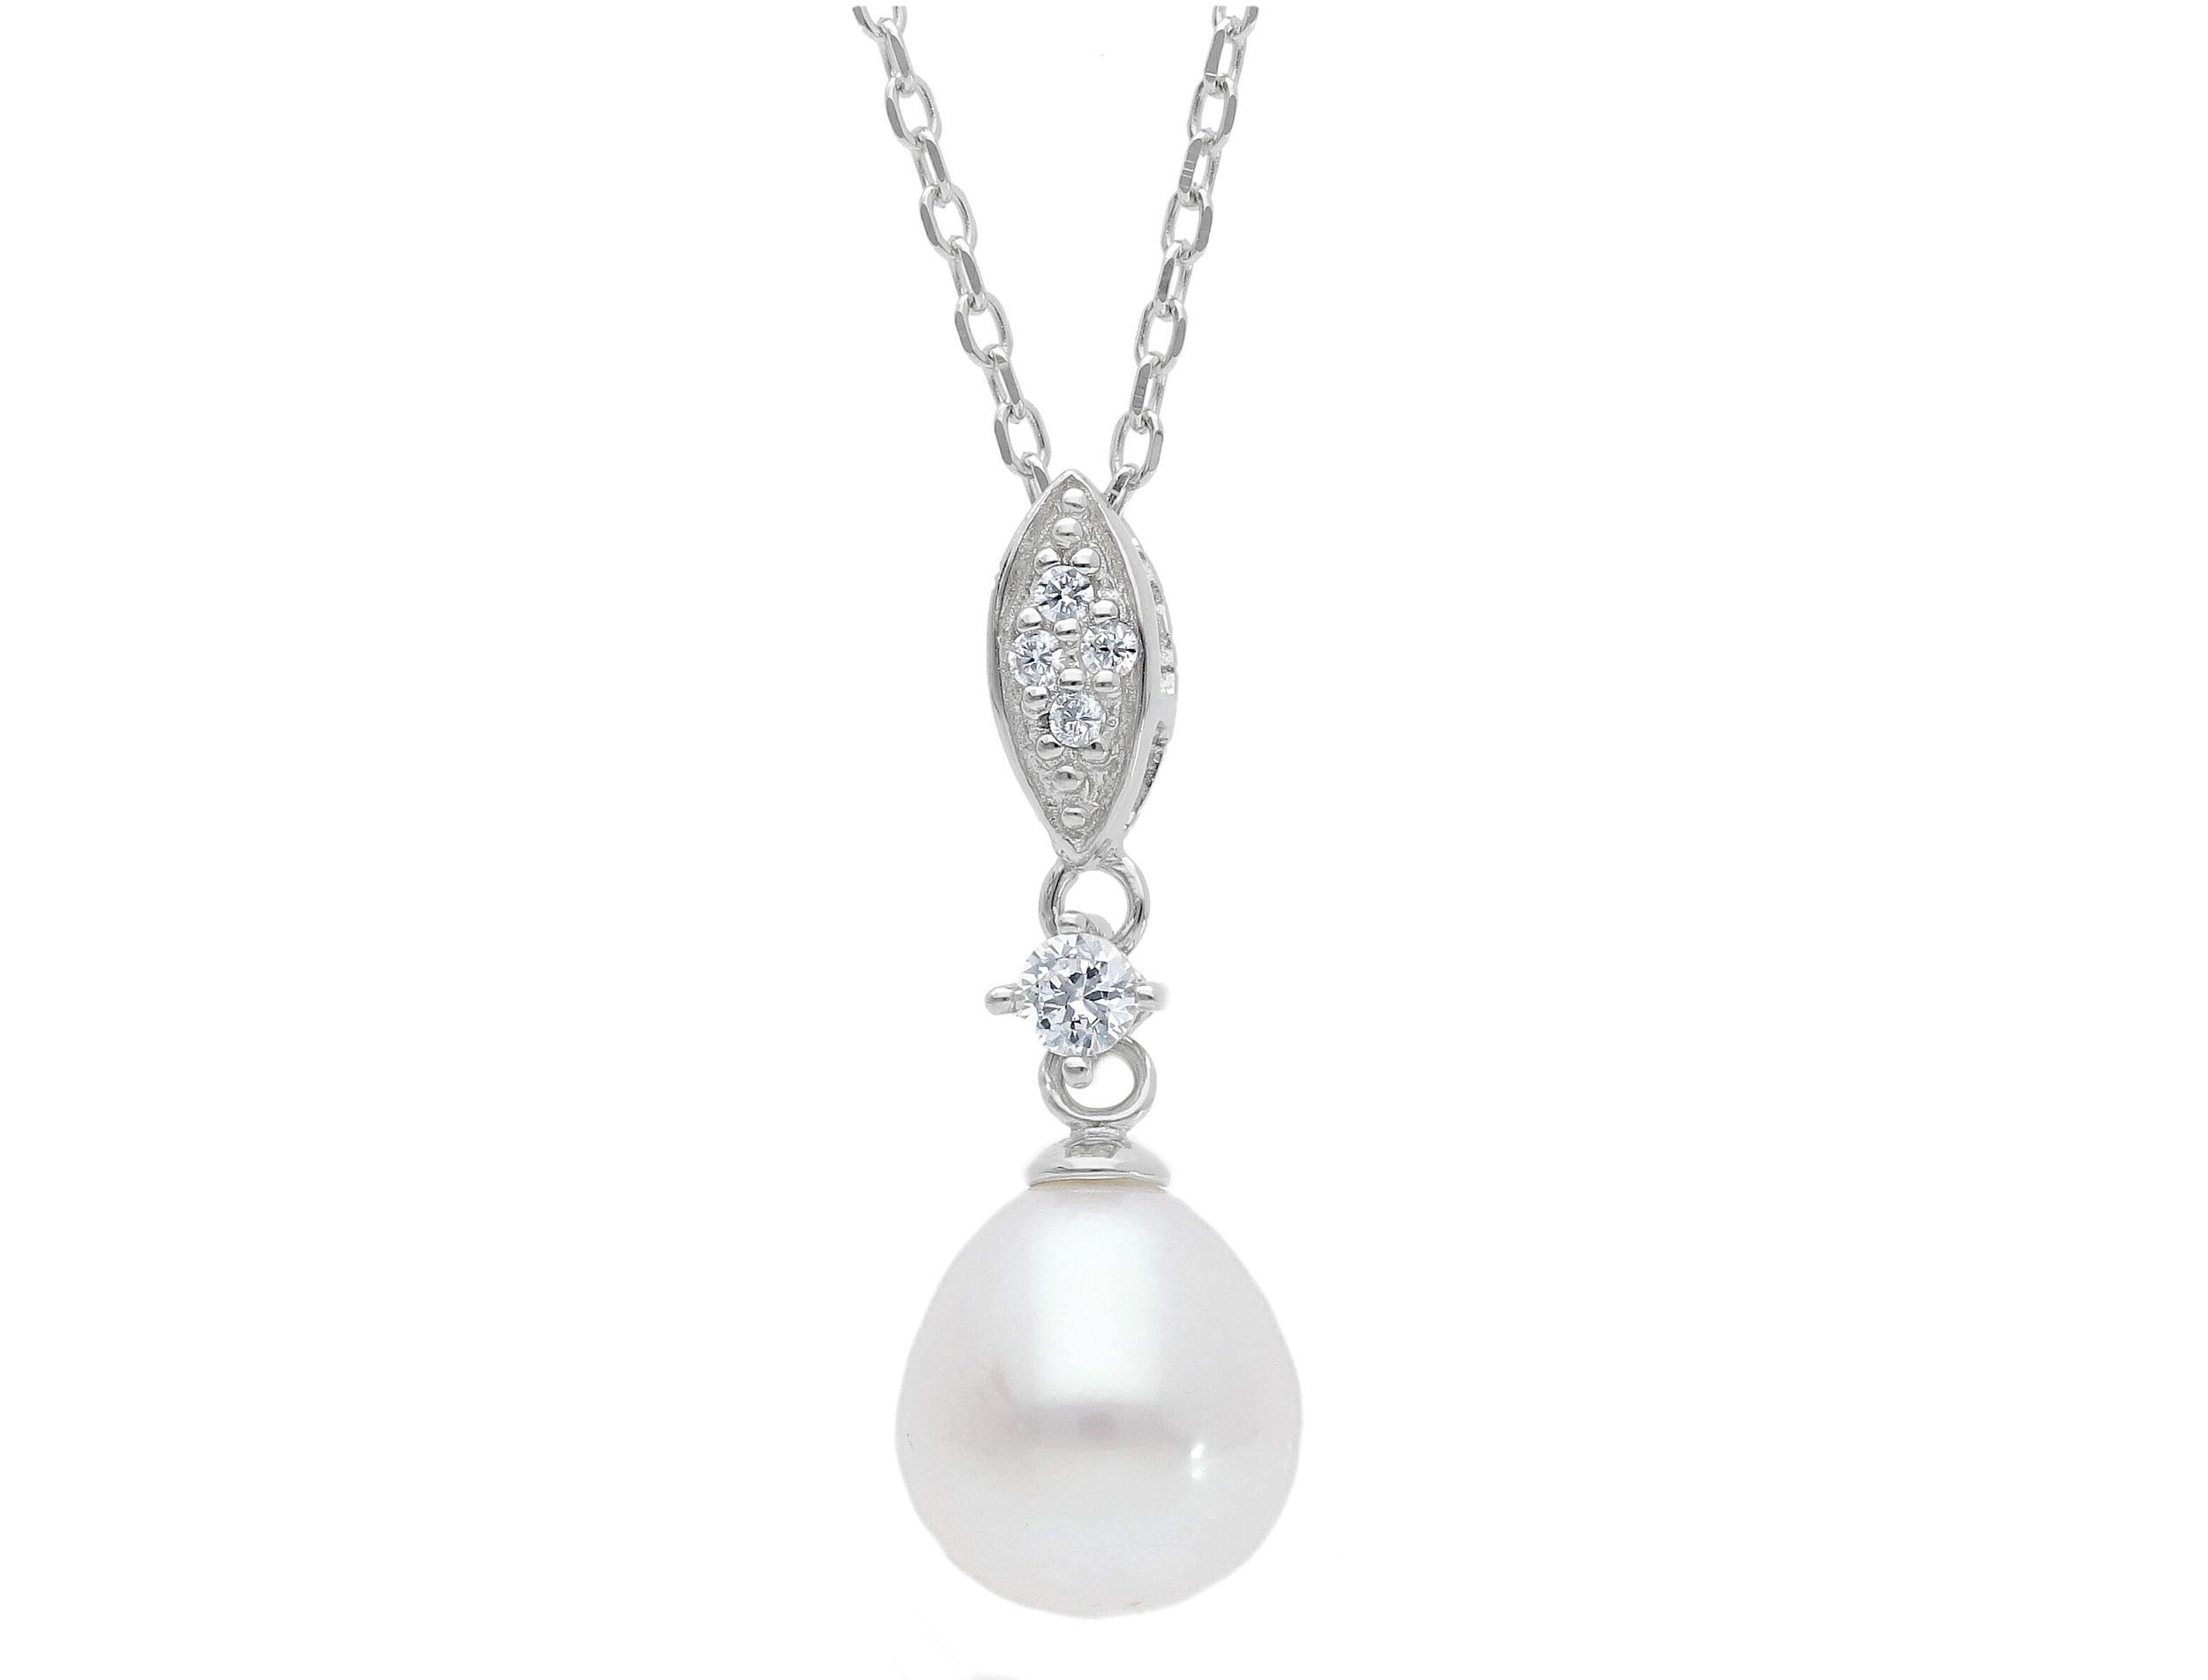 Platinum plated silver 925° necklace with a pearl & zircons (code S231005)